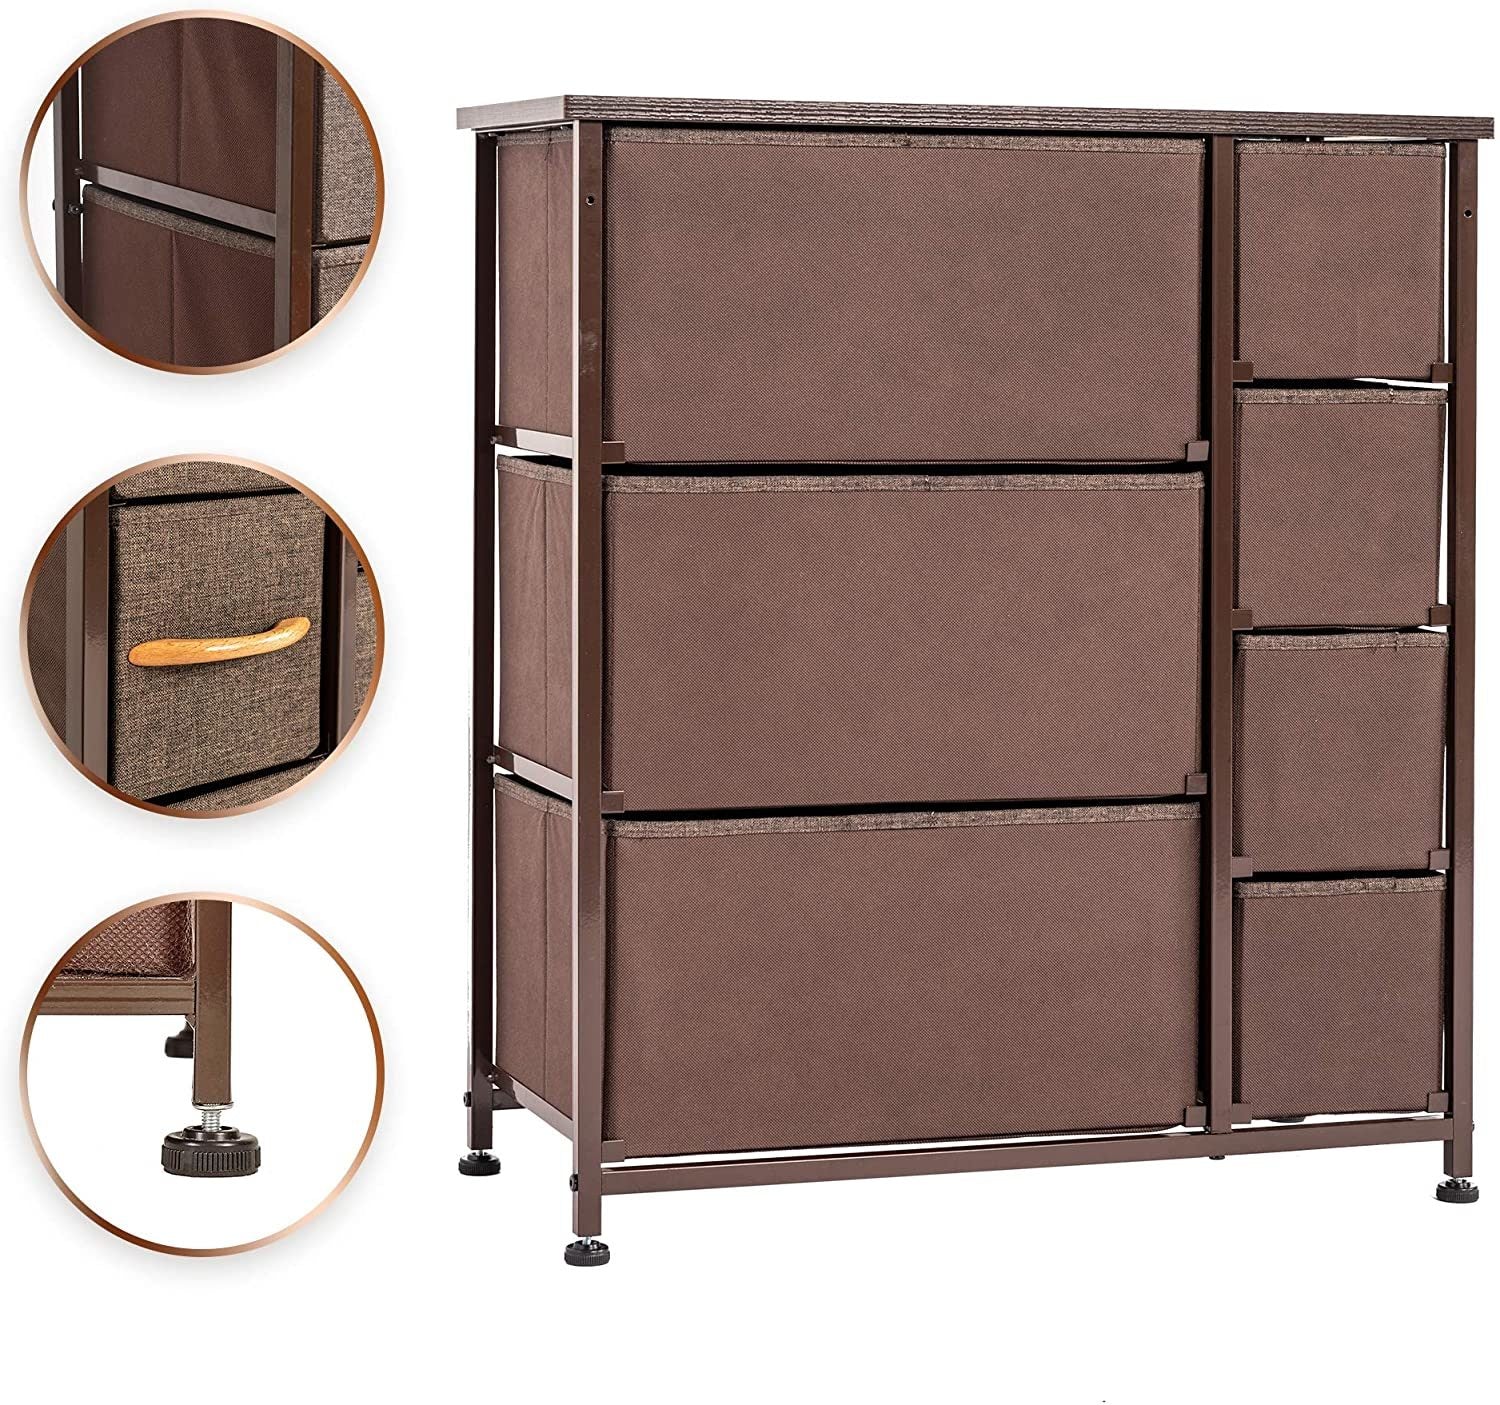 Dresser Storage Tower with 7 Drawers, Sturdy Steel Frame, Wood Top, Easy Pull Fabric Bins, Wood Handles, Organizer Unit for Bedroom, Entryway, Hallway, Closets - Brown